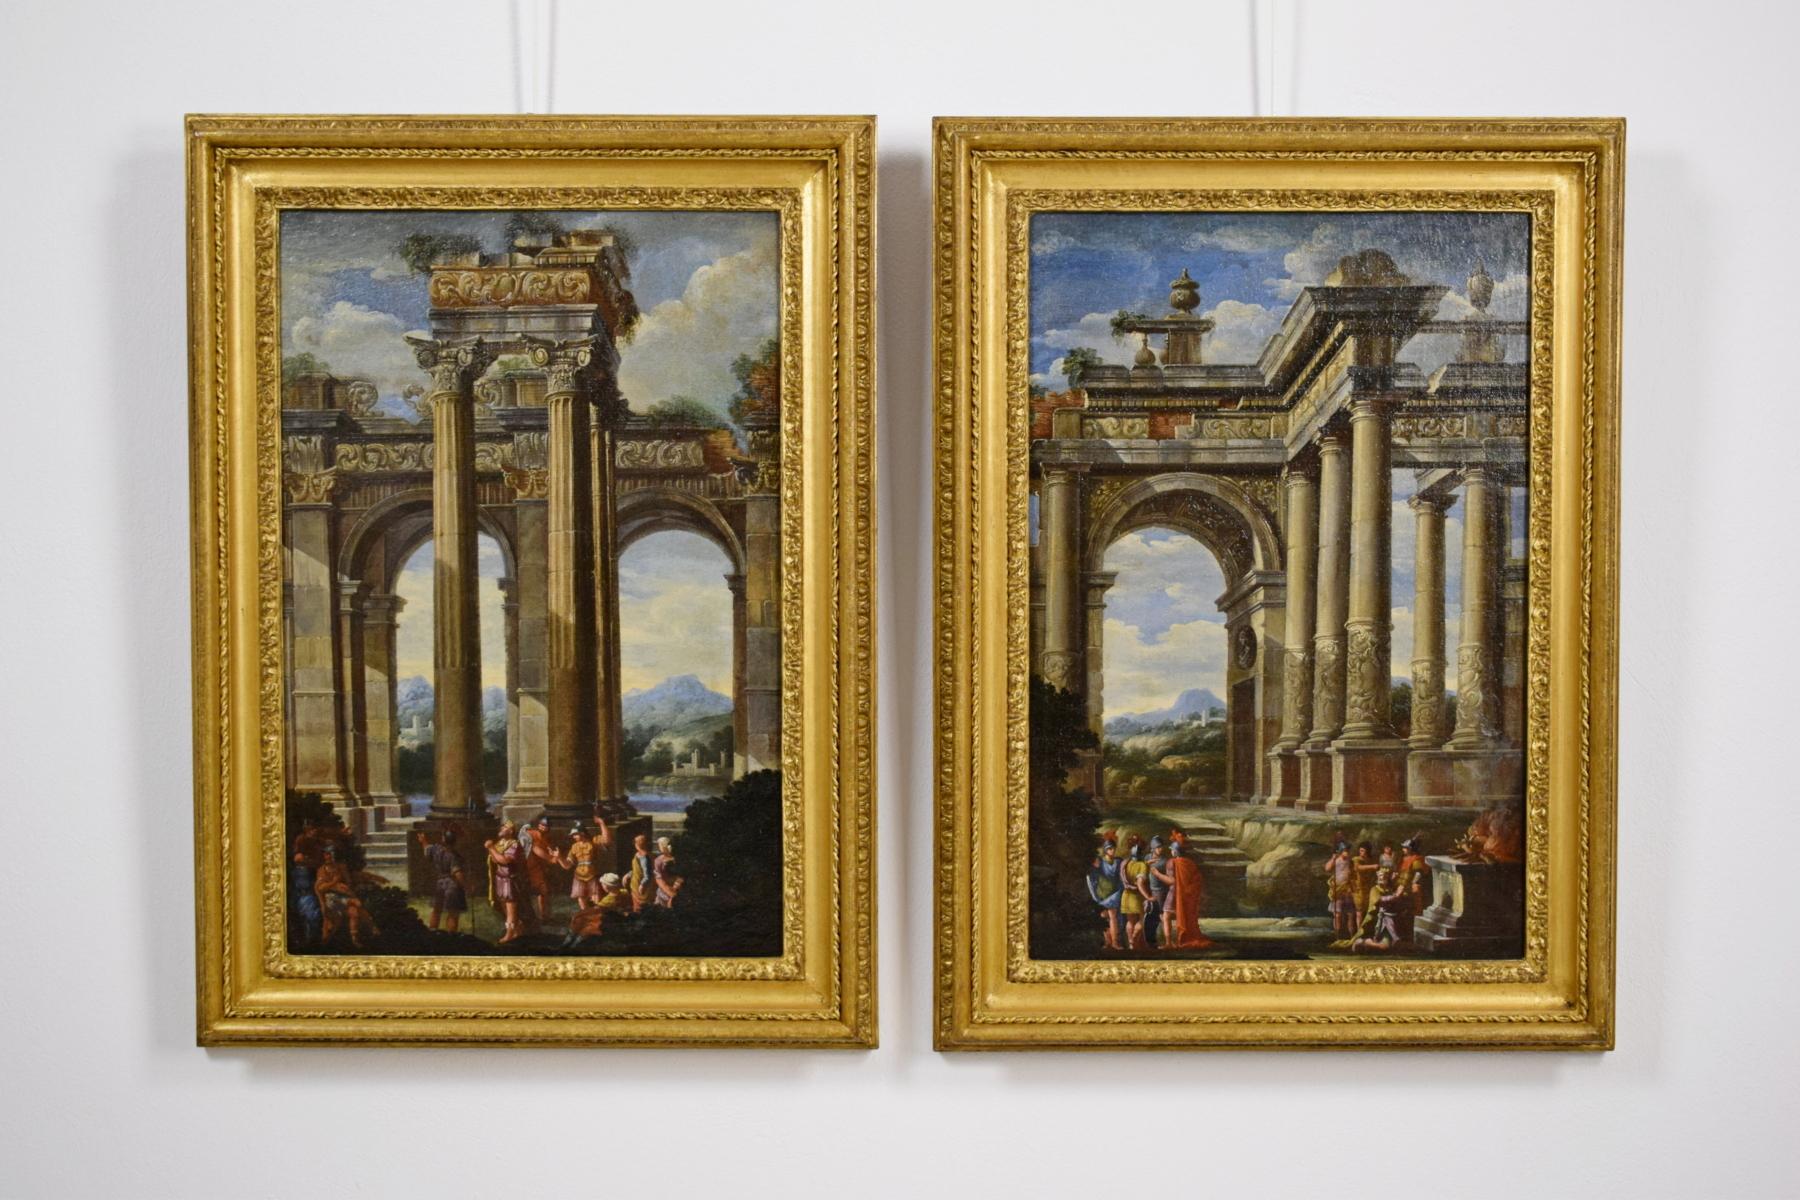 Alberto Carlieri (Rome 1672-1720)

The repentance and sacrifice of King David

Oil on canvas, Measurements: with frame H 87 x W 64 cm - only square H 70 x L 47 cm

Good storage conditions

The pair of paintings depicts two architectural whims with